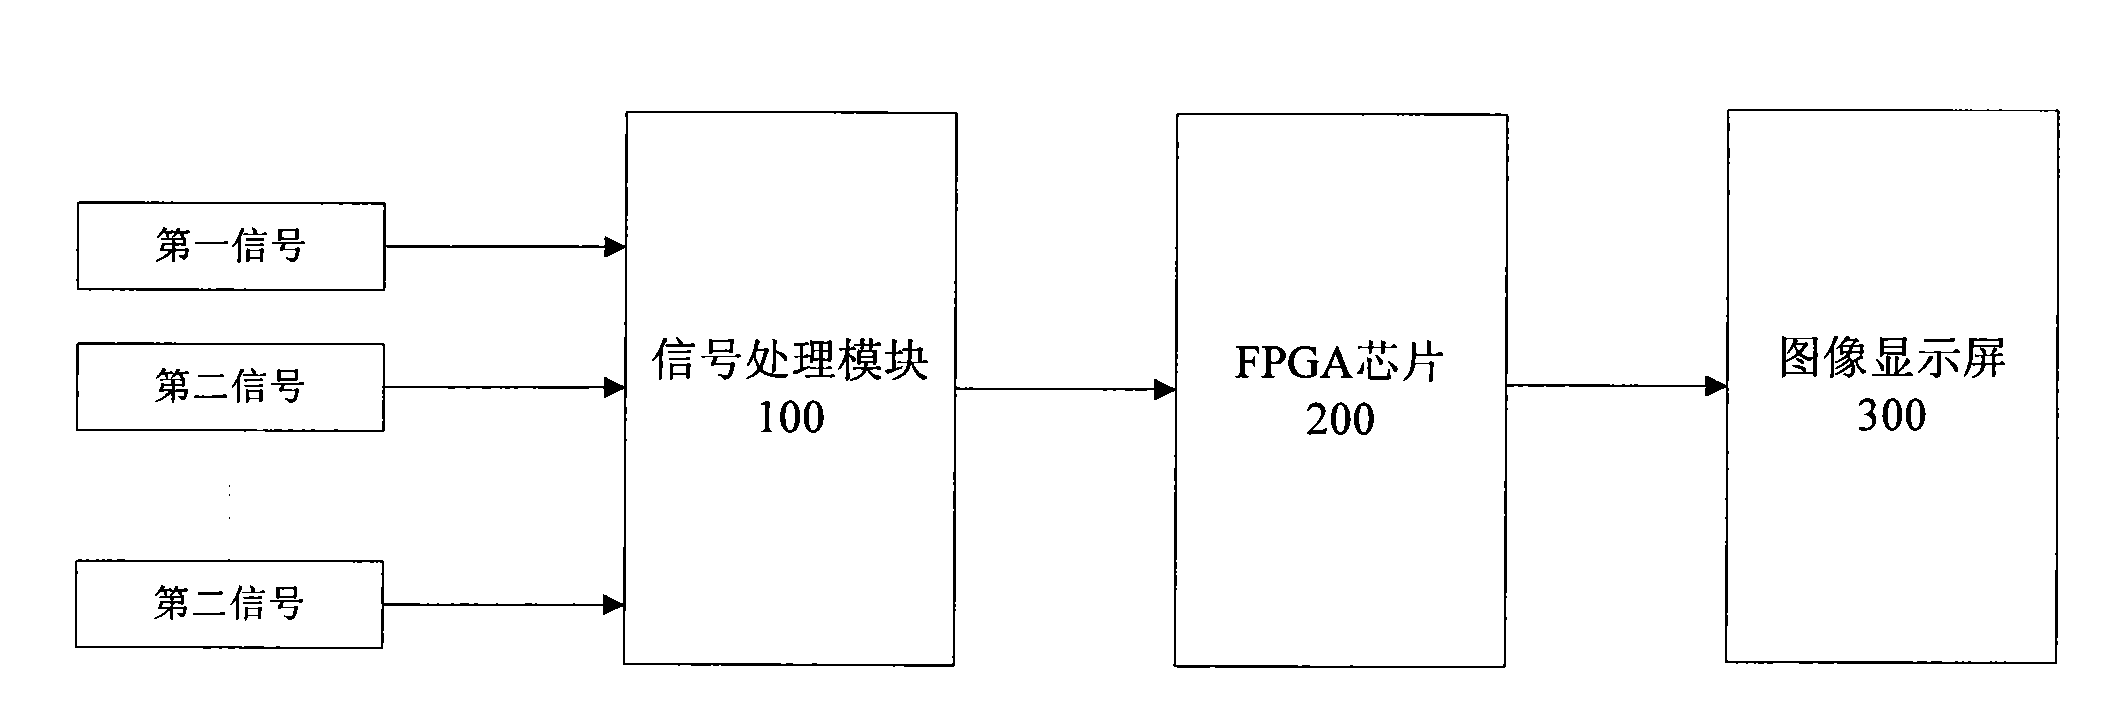 Method and device for seamlessly displaying images